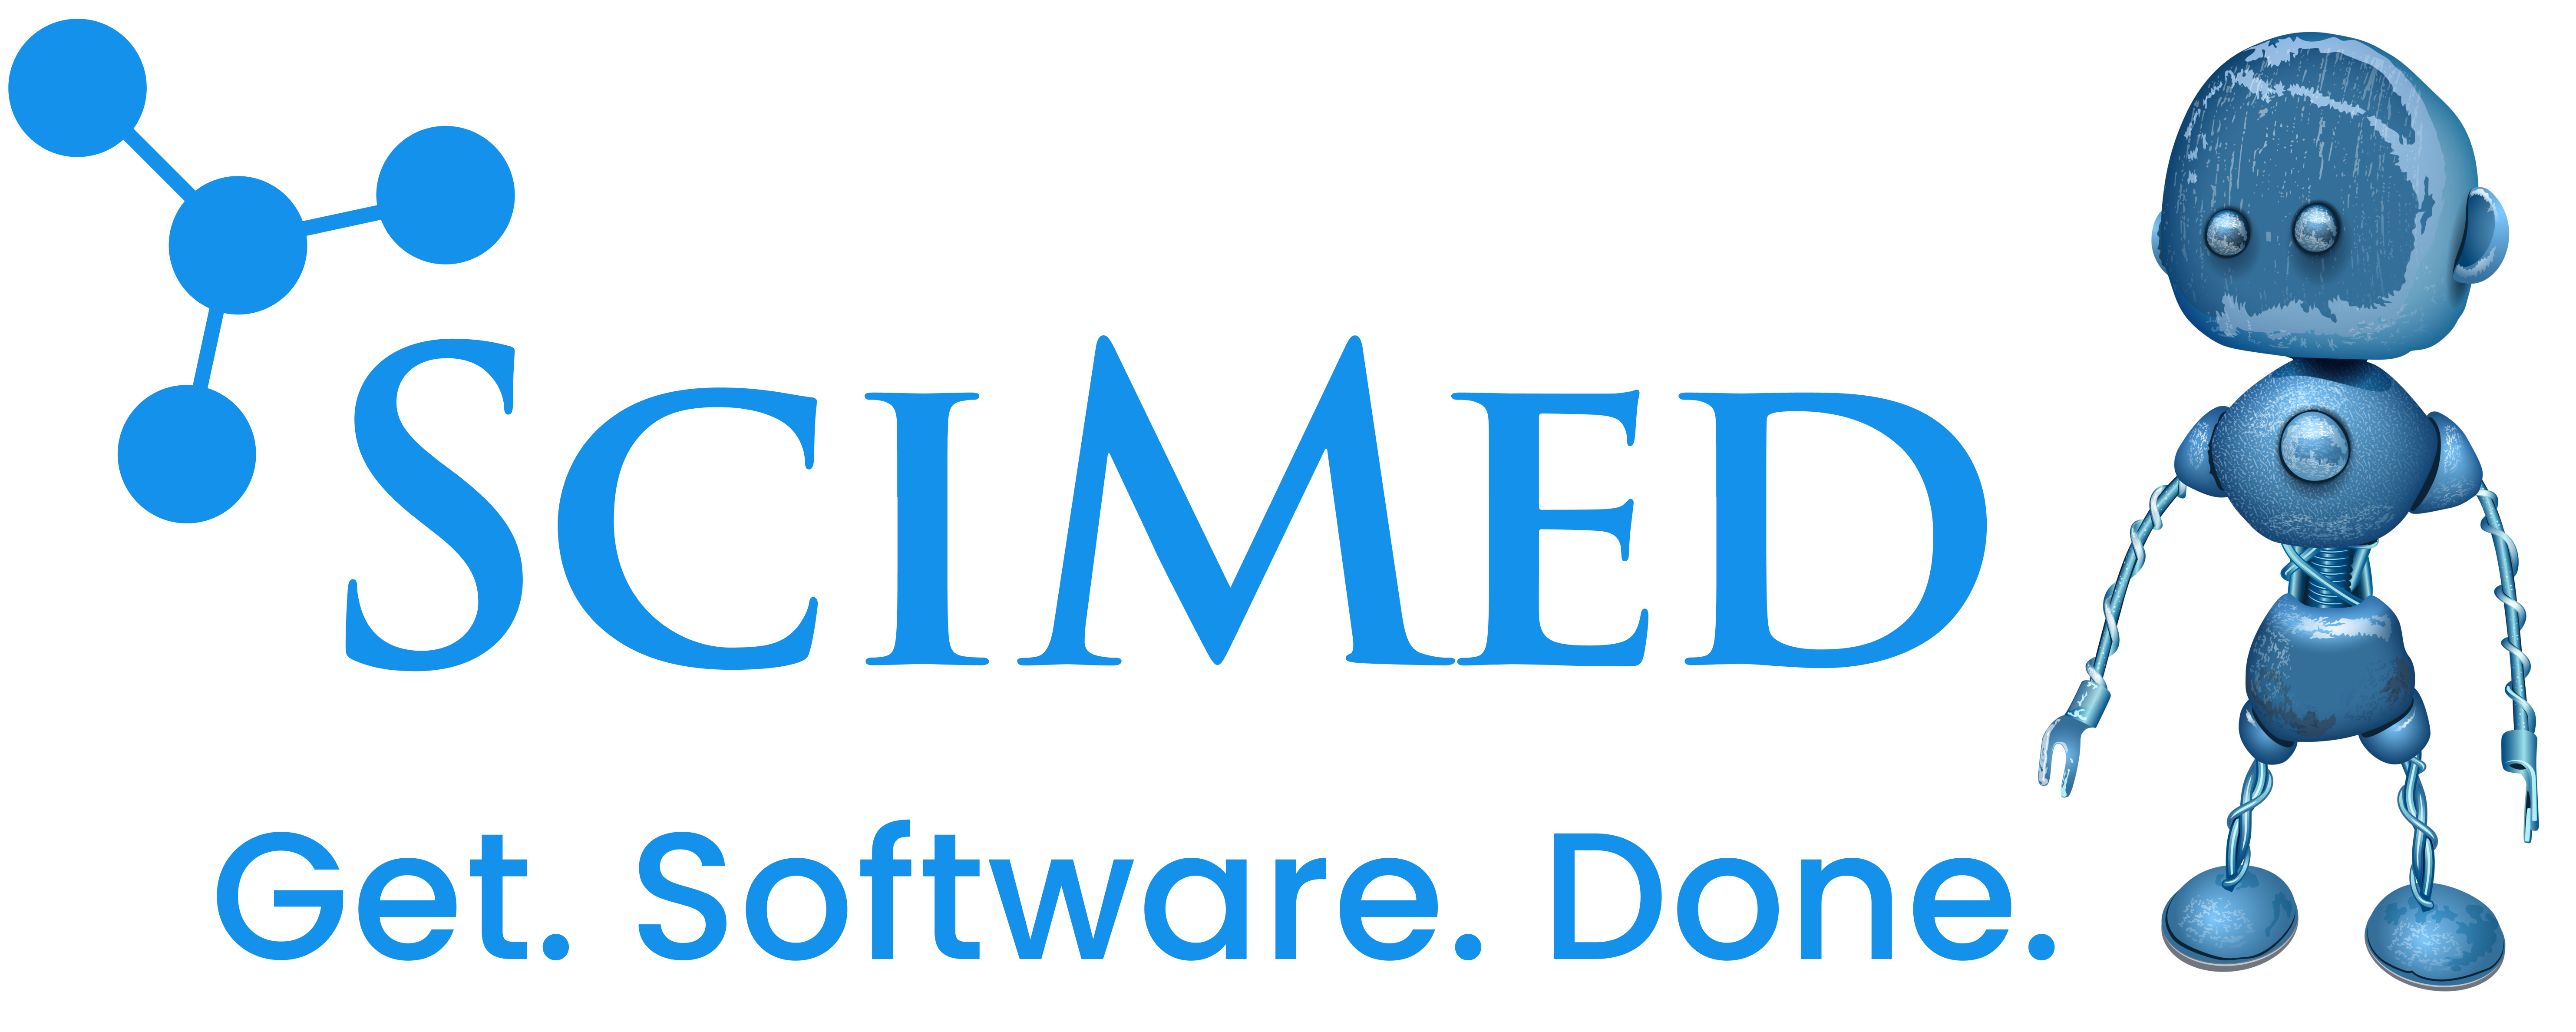 SciMed is dedicated to creating innovative products for biomedical startups and life science companies. Since 2003, SciMed has empowered founders, executives, researchers, and project teams by leveraging efficient software designs. Whether a customer needs quick advice or long-term support, SciMed works on problems of all sizes. See more at scimed.io. See SciMed's robot art collection in the windows at 327-329 W Main.